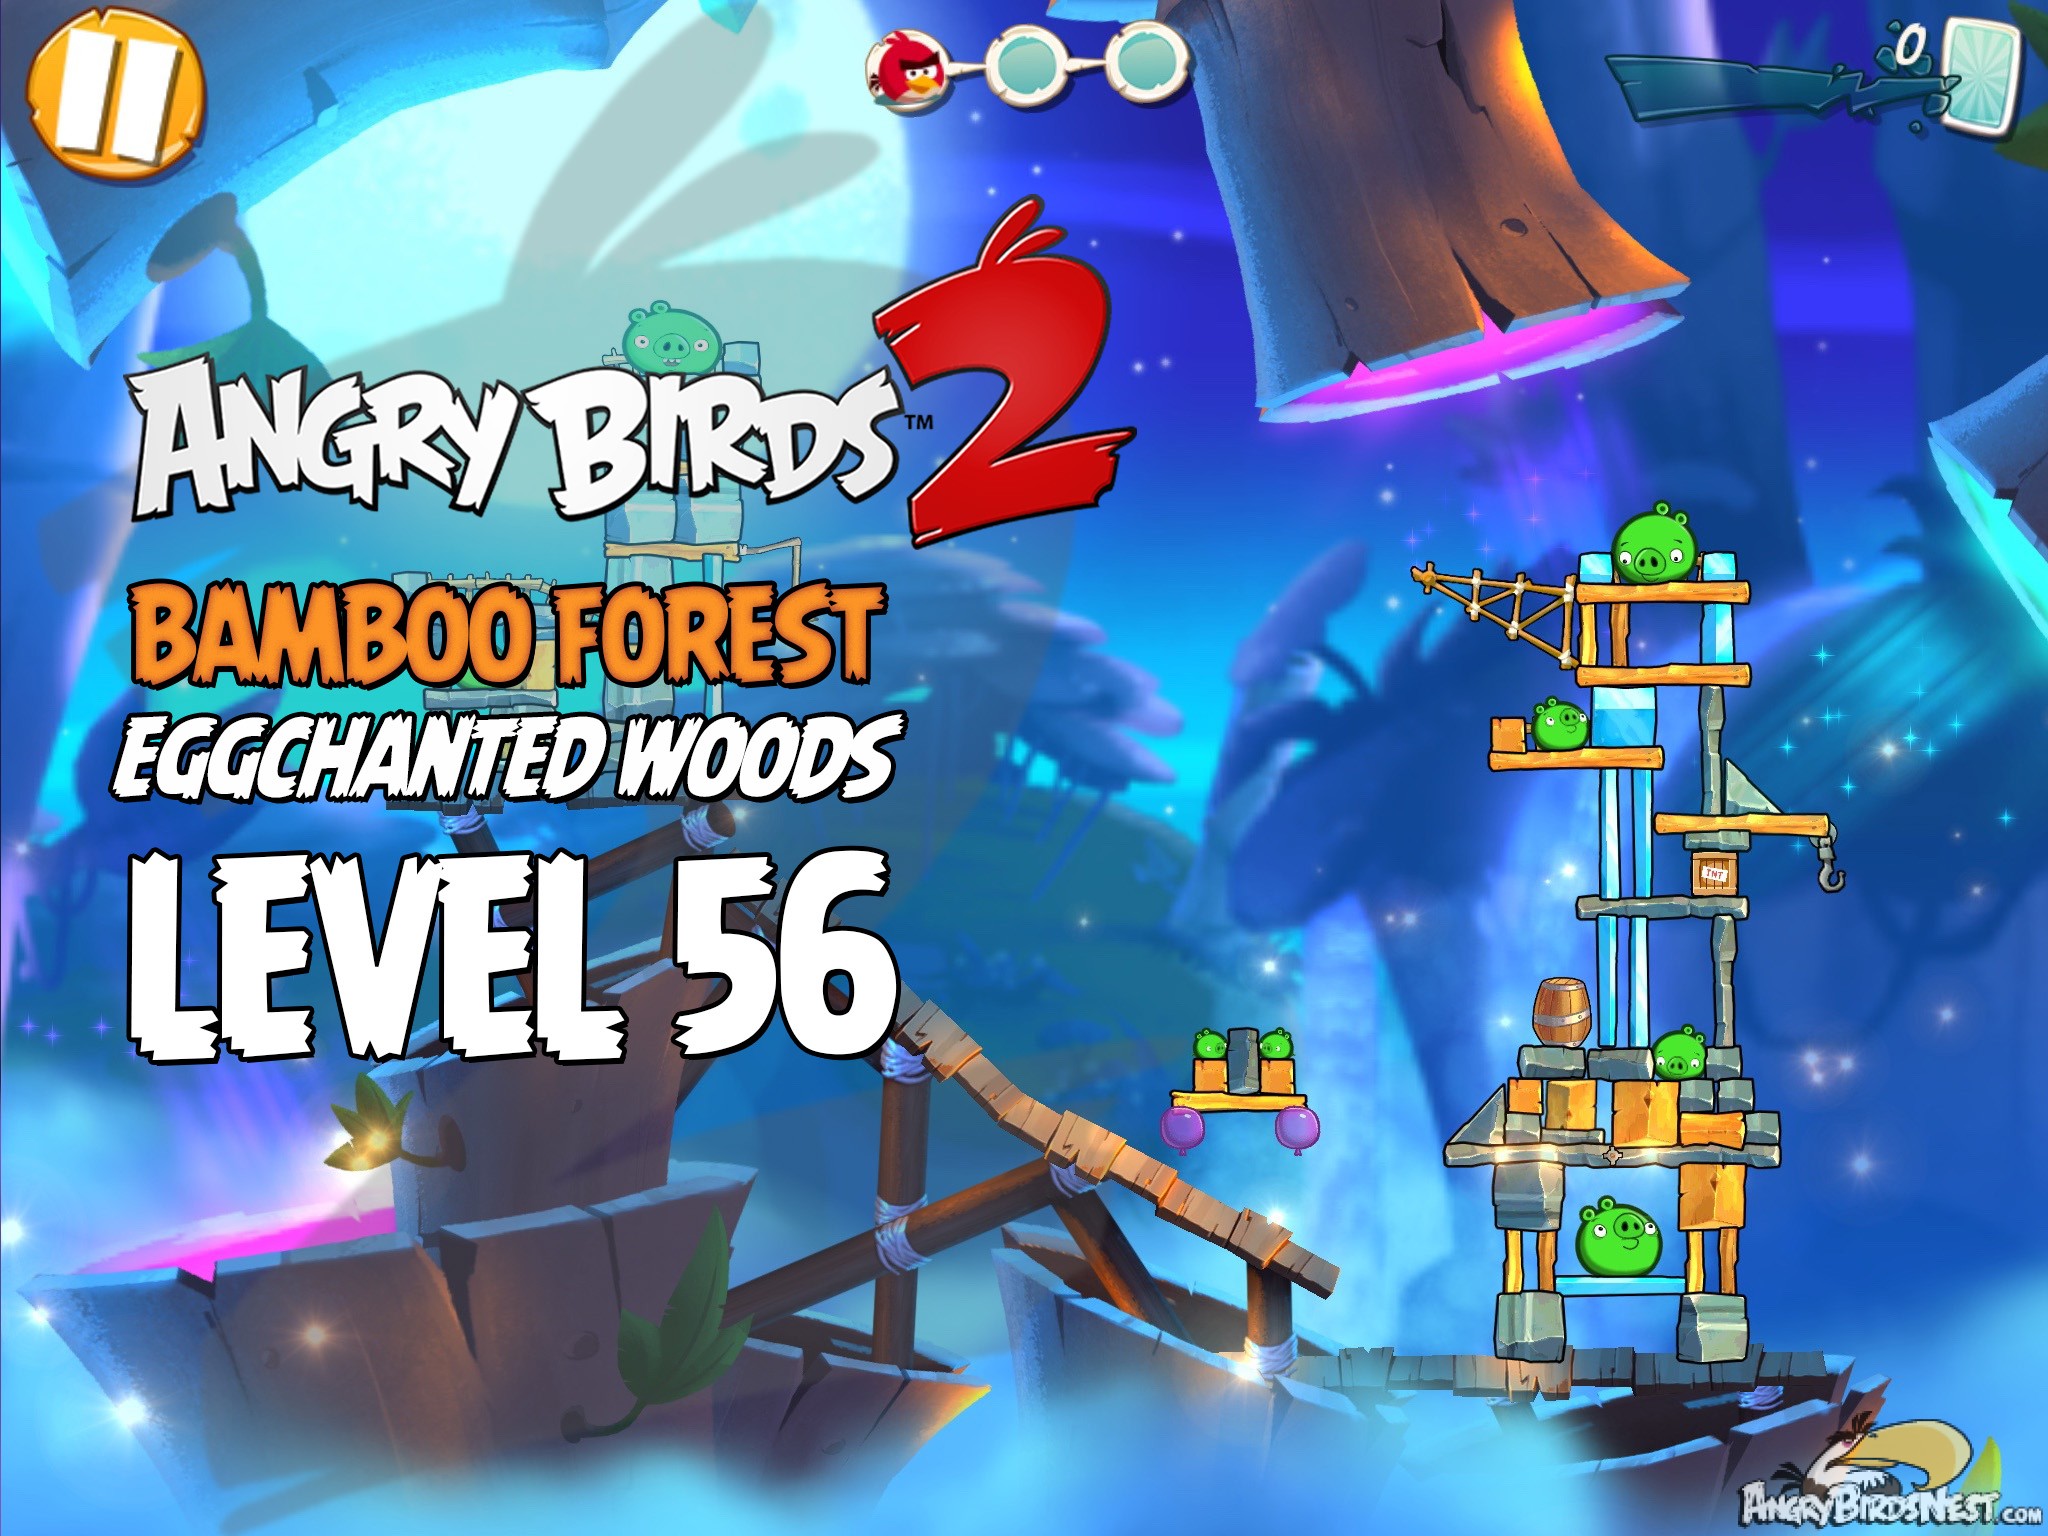 Angry Birds 2 Bamboo Forest Eggchanted Woods Level 56